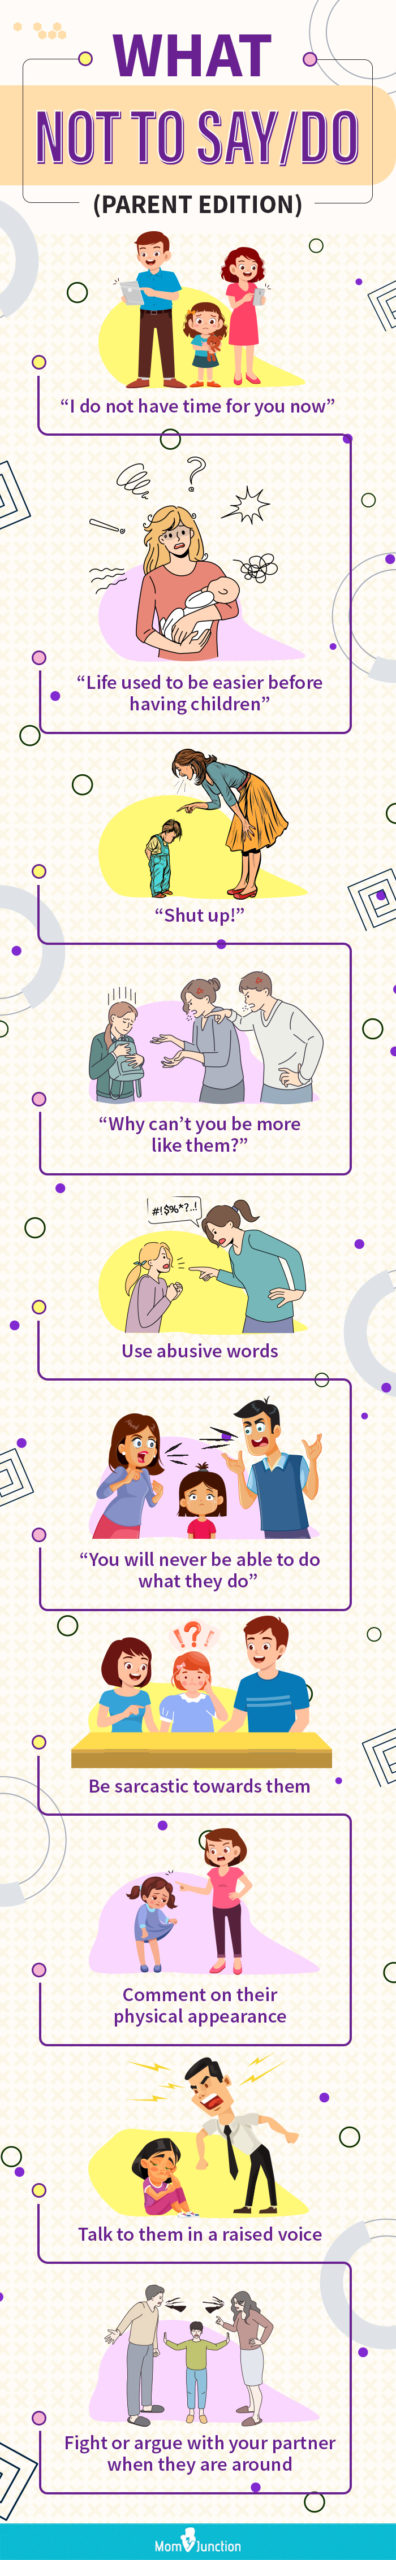 what not to say [infographic]